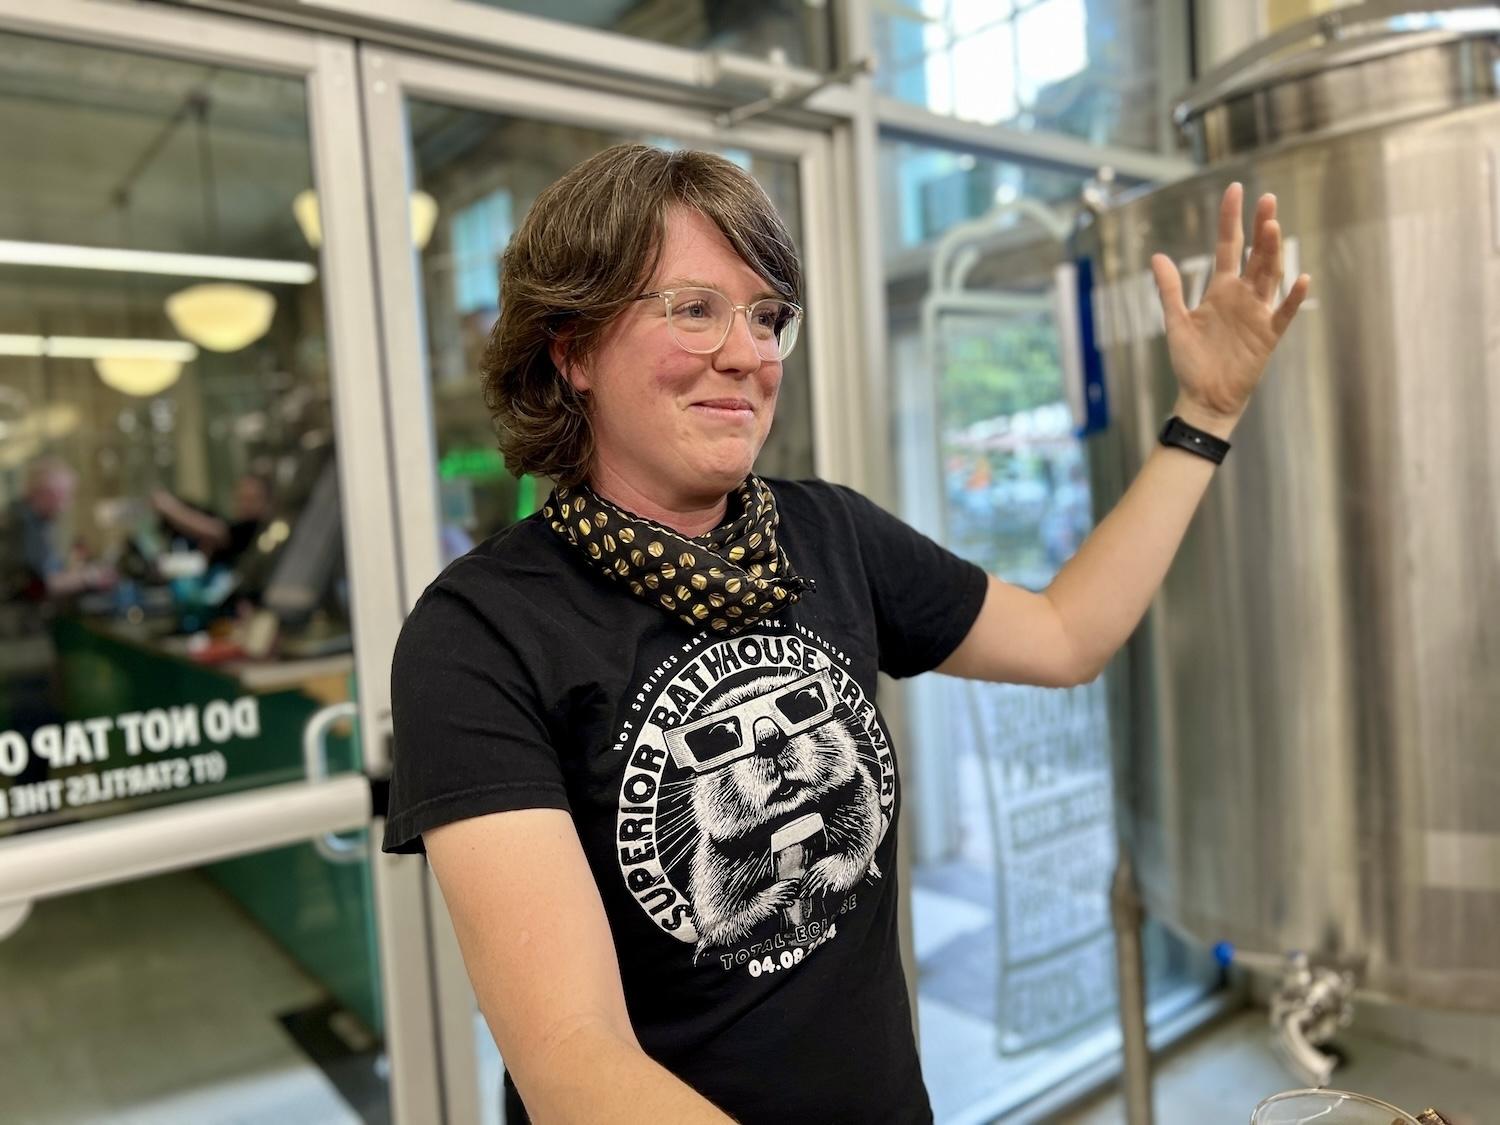 Rose Schweikhart is the founder/owner of the Superior Bathhouse Brewery, the only brewery in an American national park.